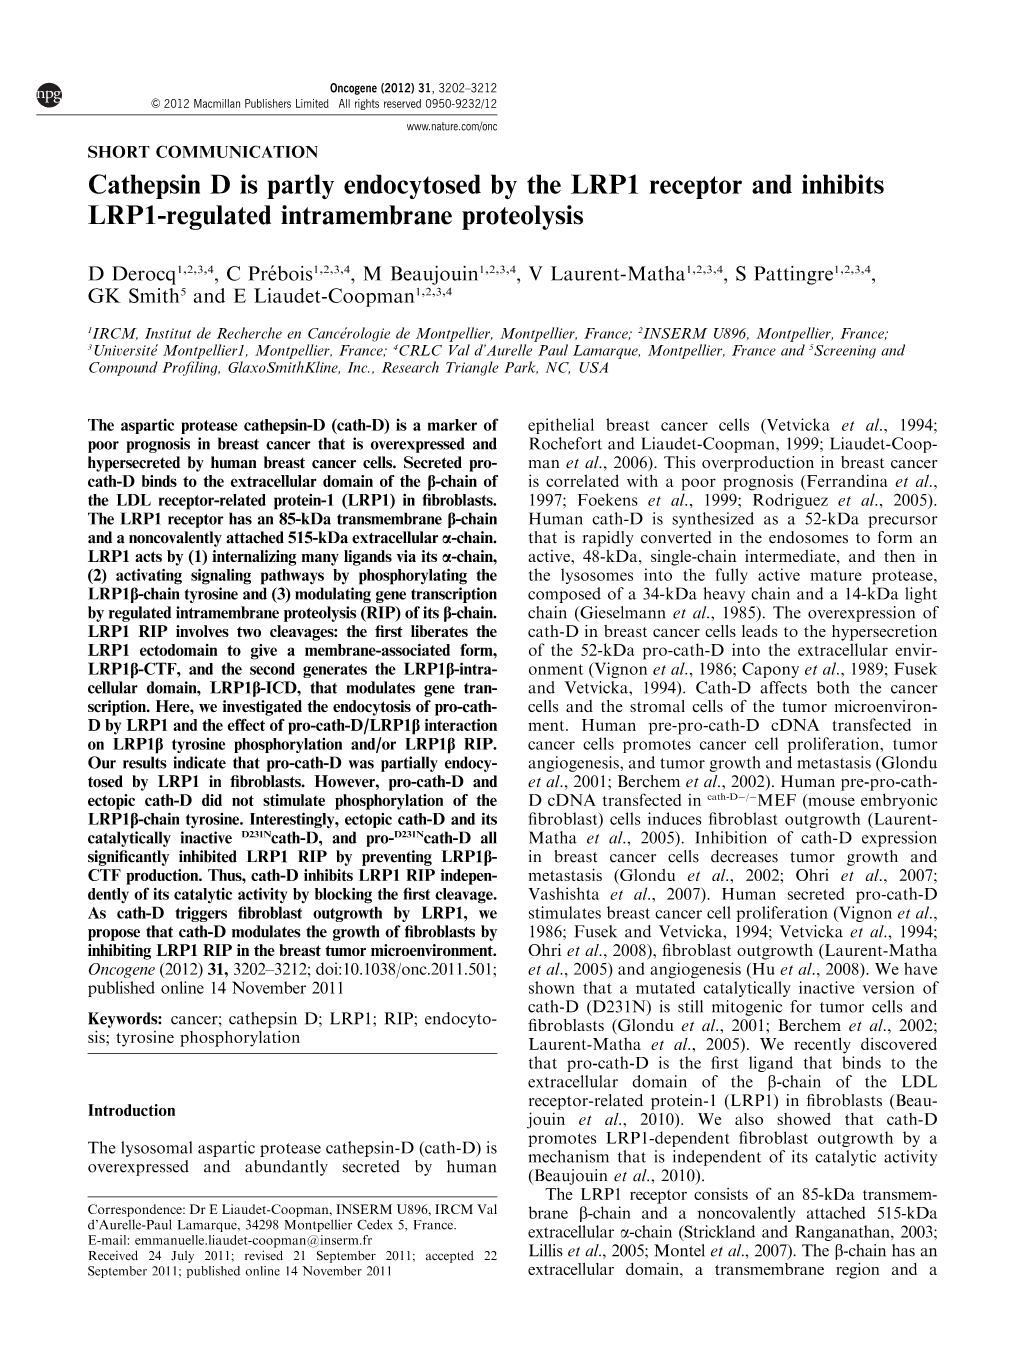 Cathepsin D Is Partly Endocytosed by the LRP1 Receptor and Inhibits LRP1-Regulated Intramembrane Proteolysis